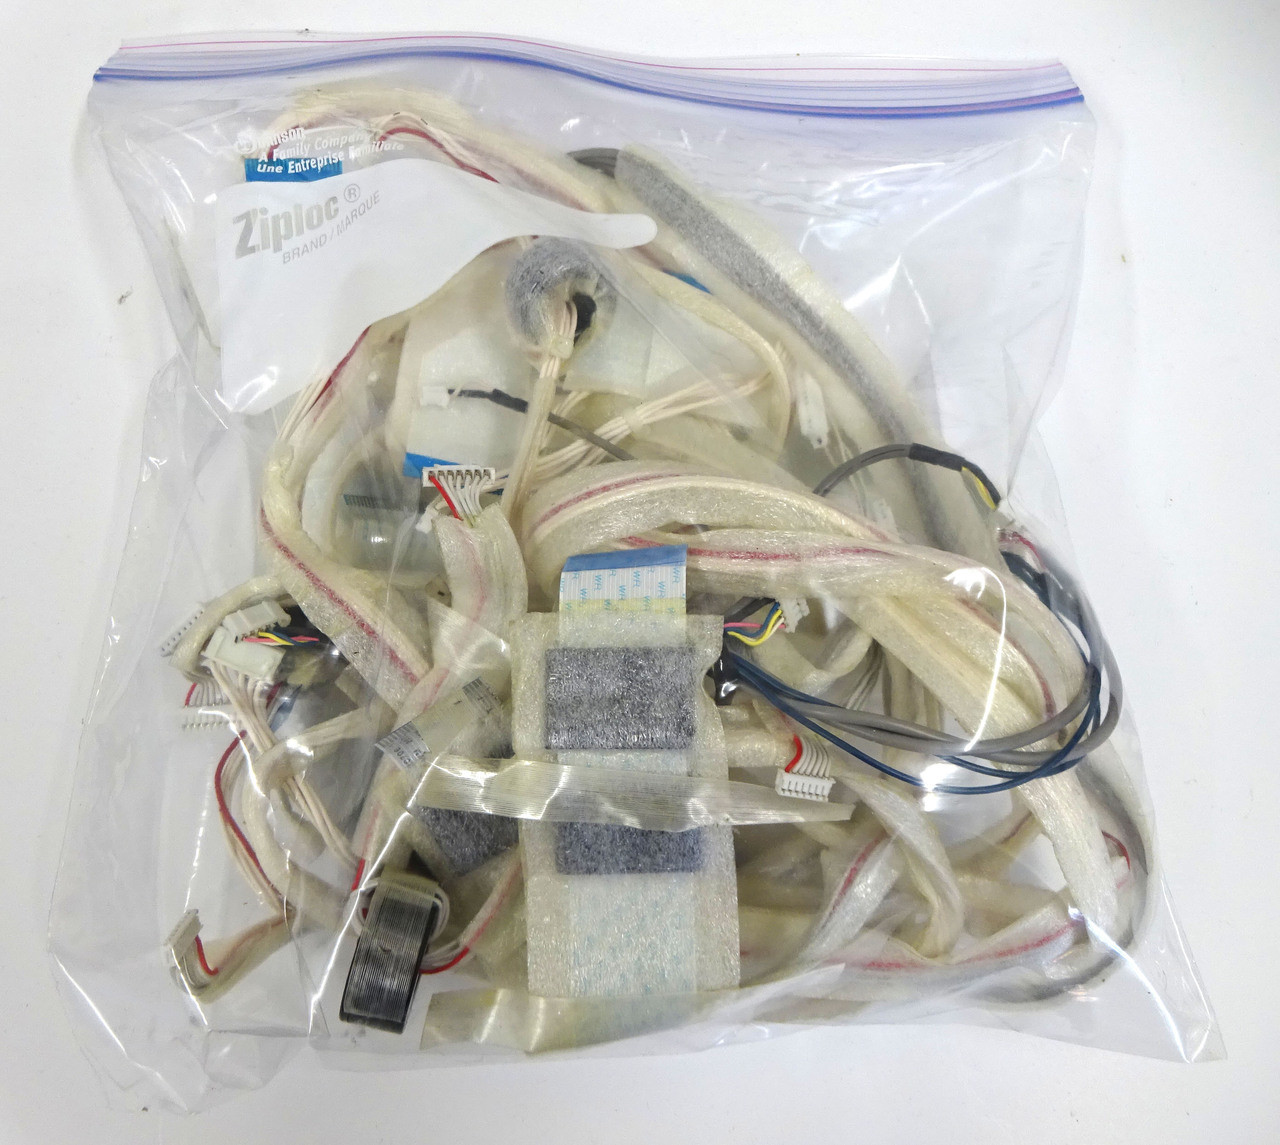 Yamaha PSR-S900 Complete Wiring Harness